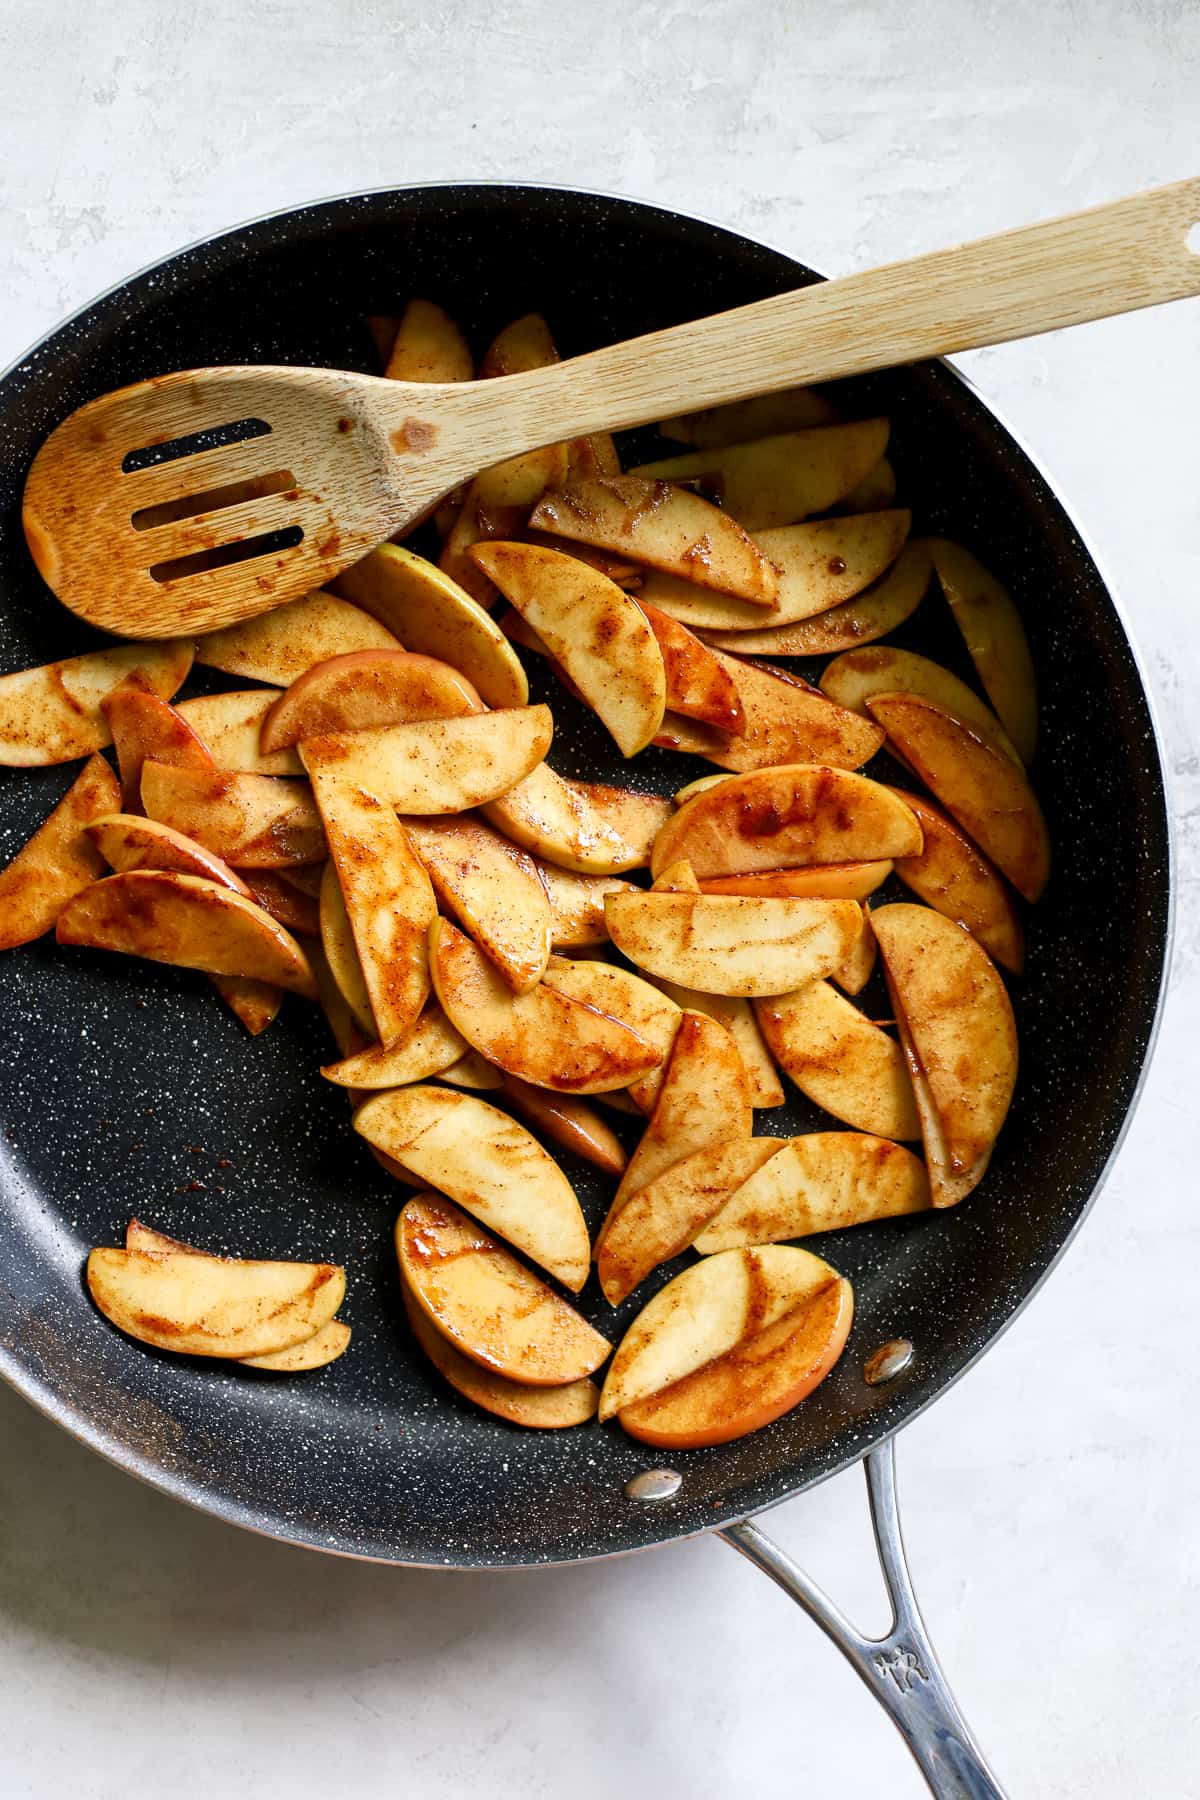 Simple sautéed apples in maple syrup and cinnamon, in black sauté pan. A bamboo spoon is resting on the side of the pan.